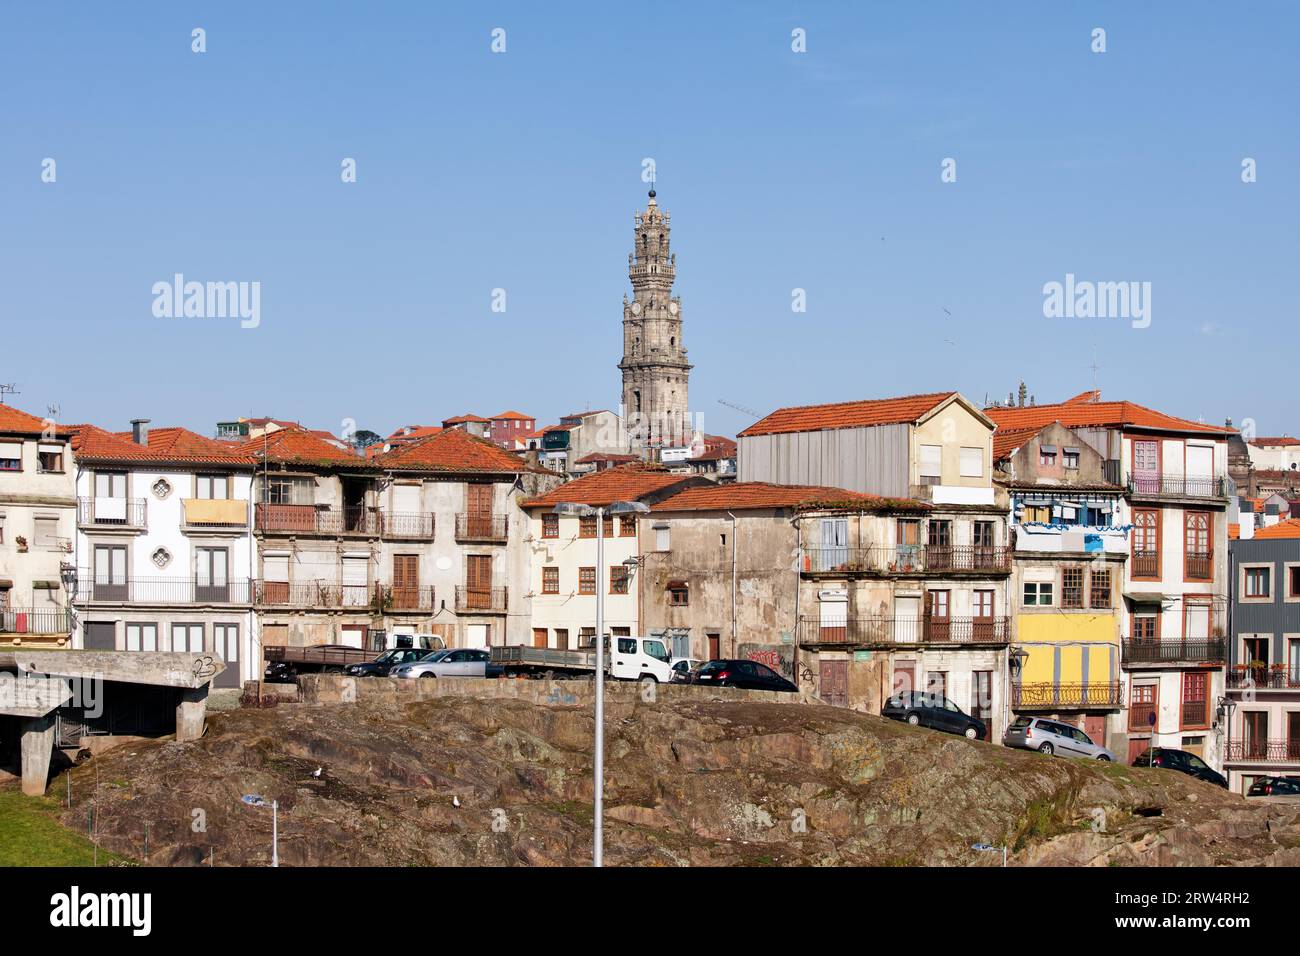 Oporto, Porto, Portugal, historic city centre skyline with Clerigos Church tower in the middle Stock Photo